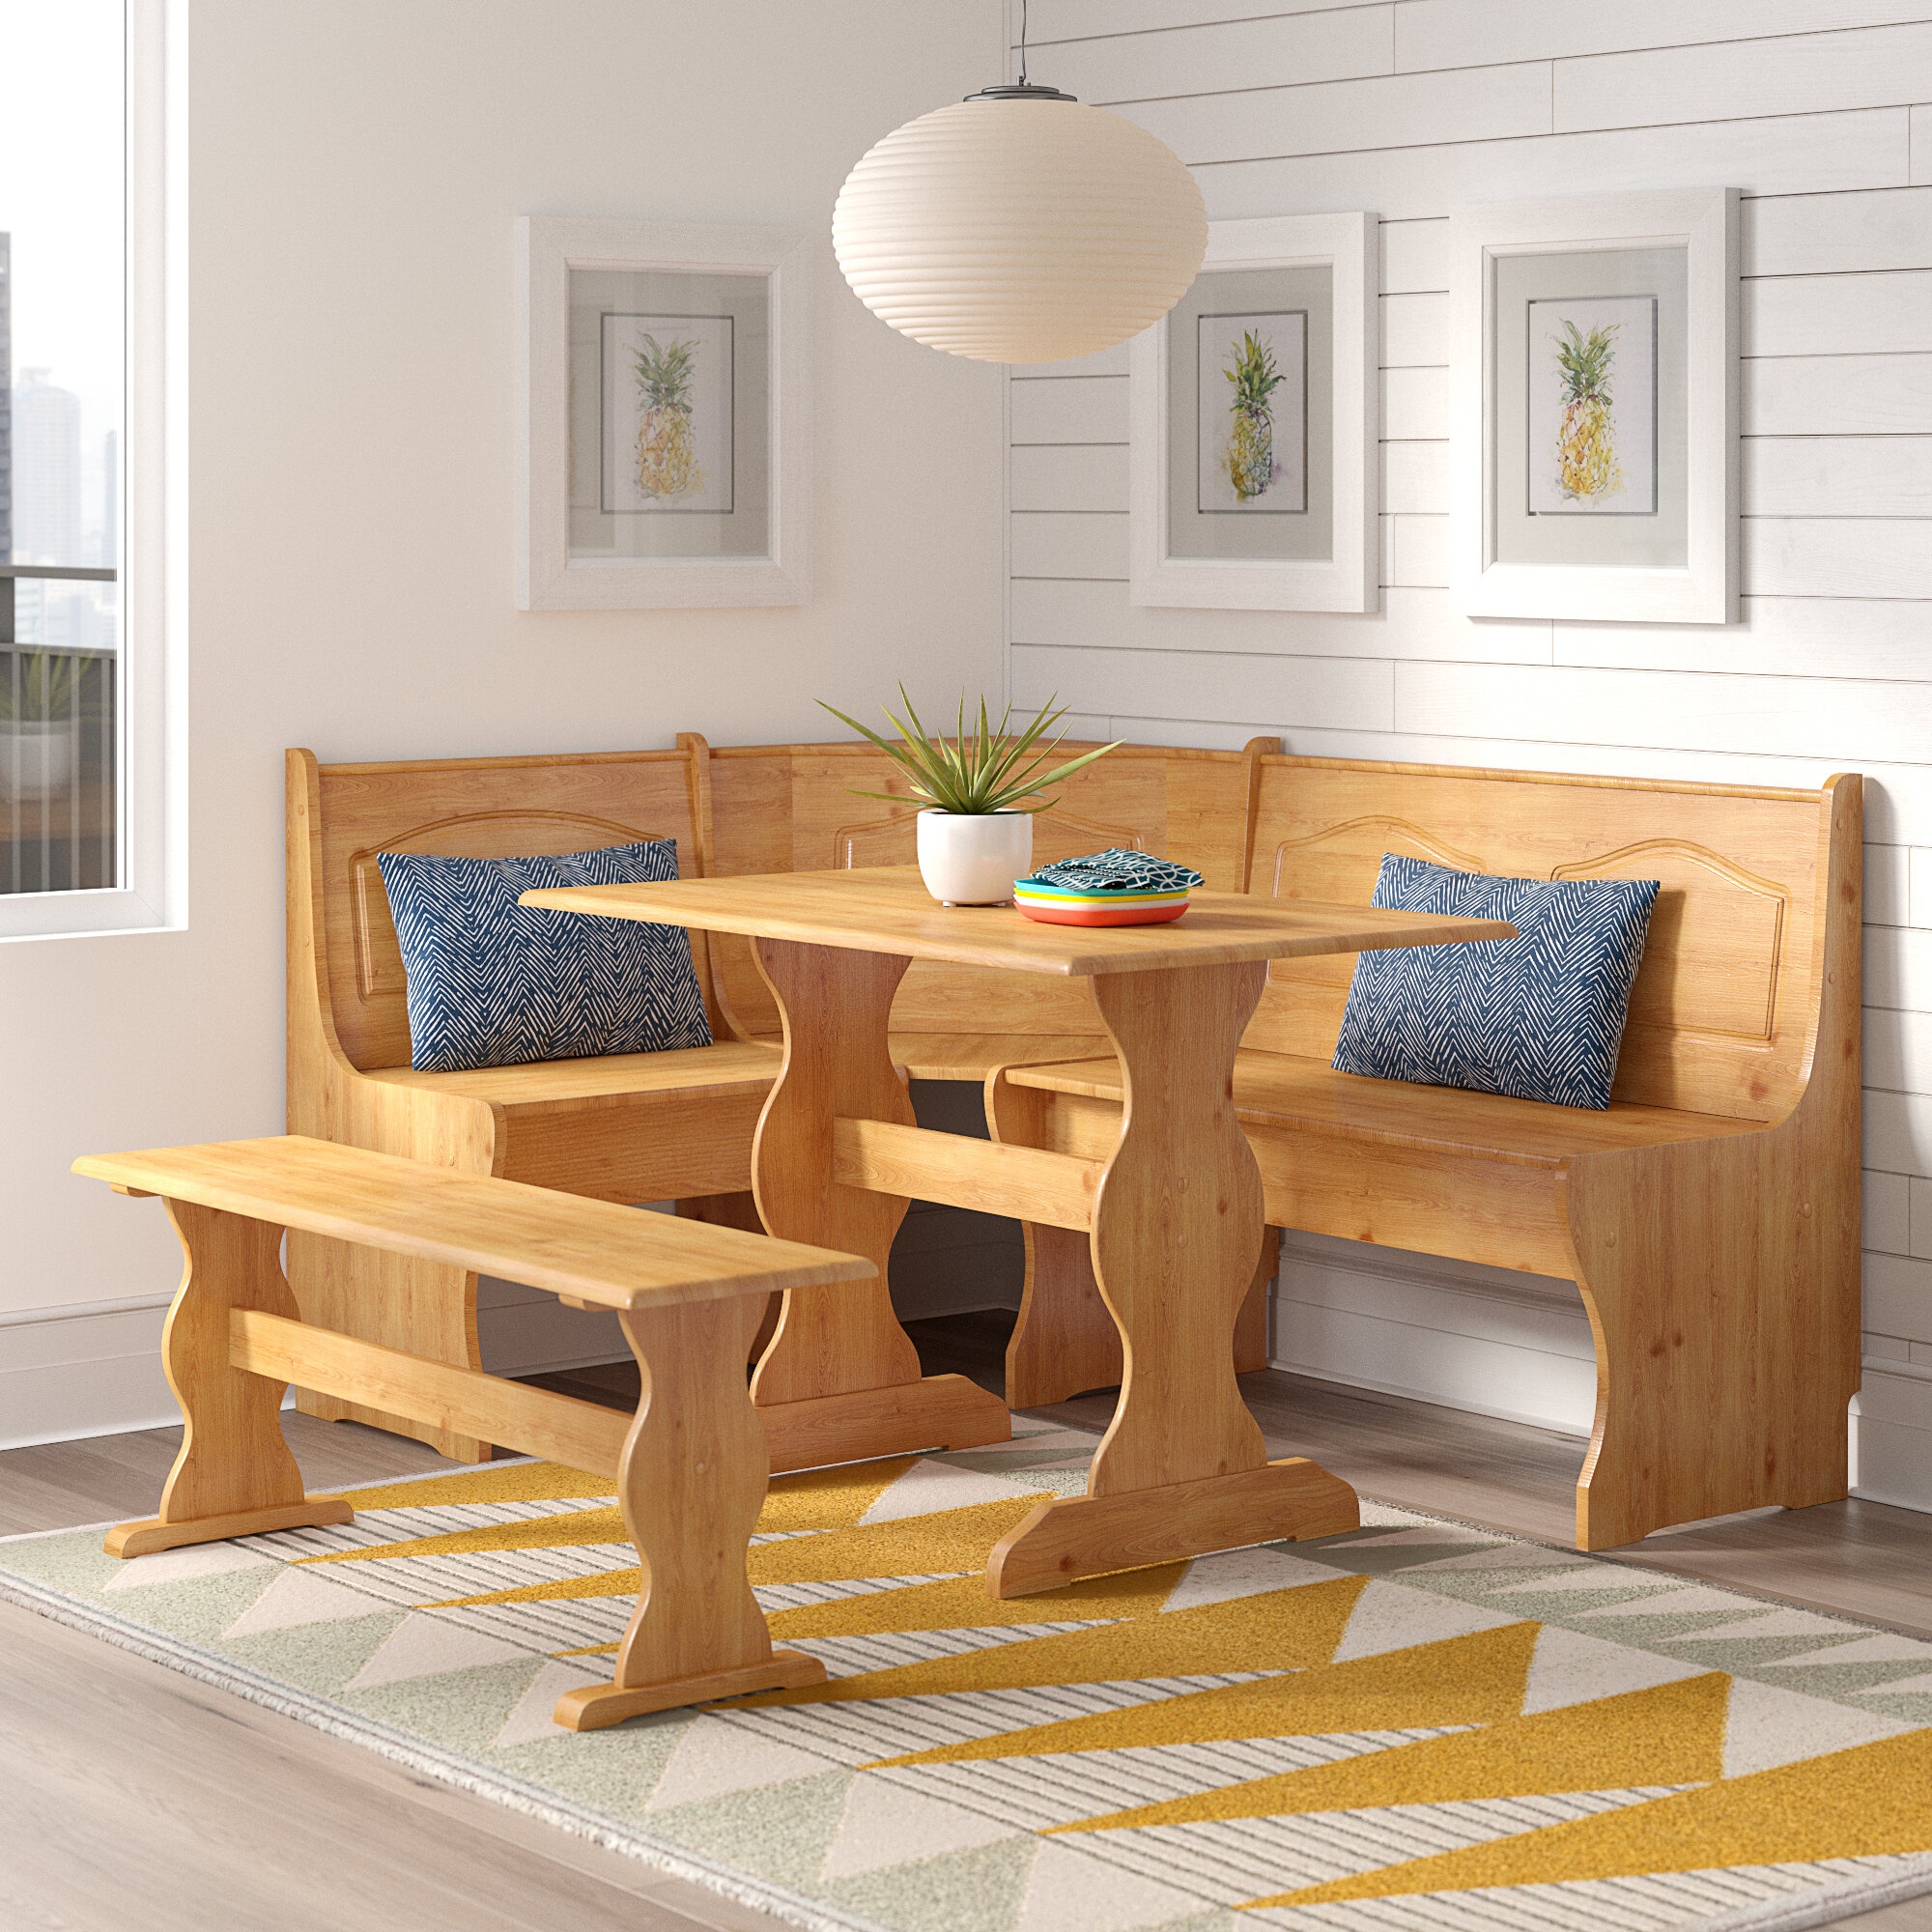 Create a Nook Look: Breakfast Nook Ideas for Your Kitchen - TIMBER TO TABLE